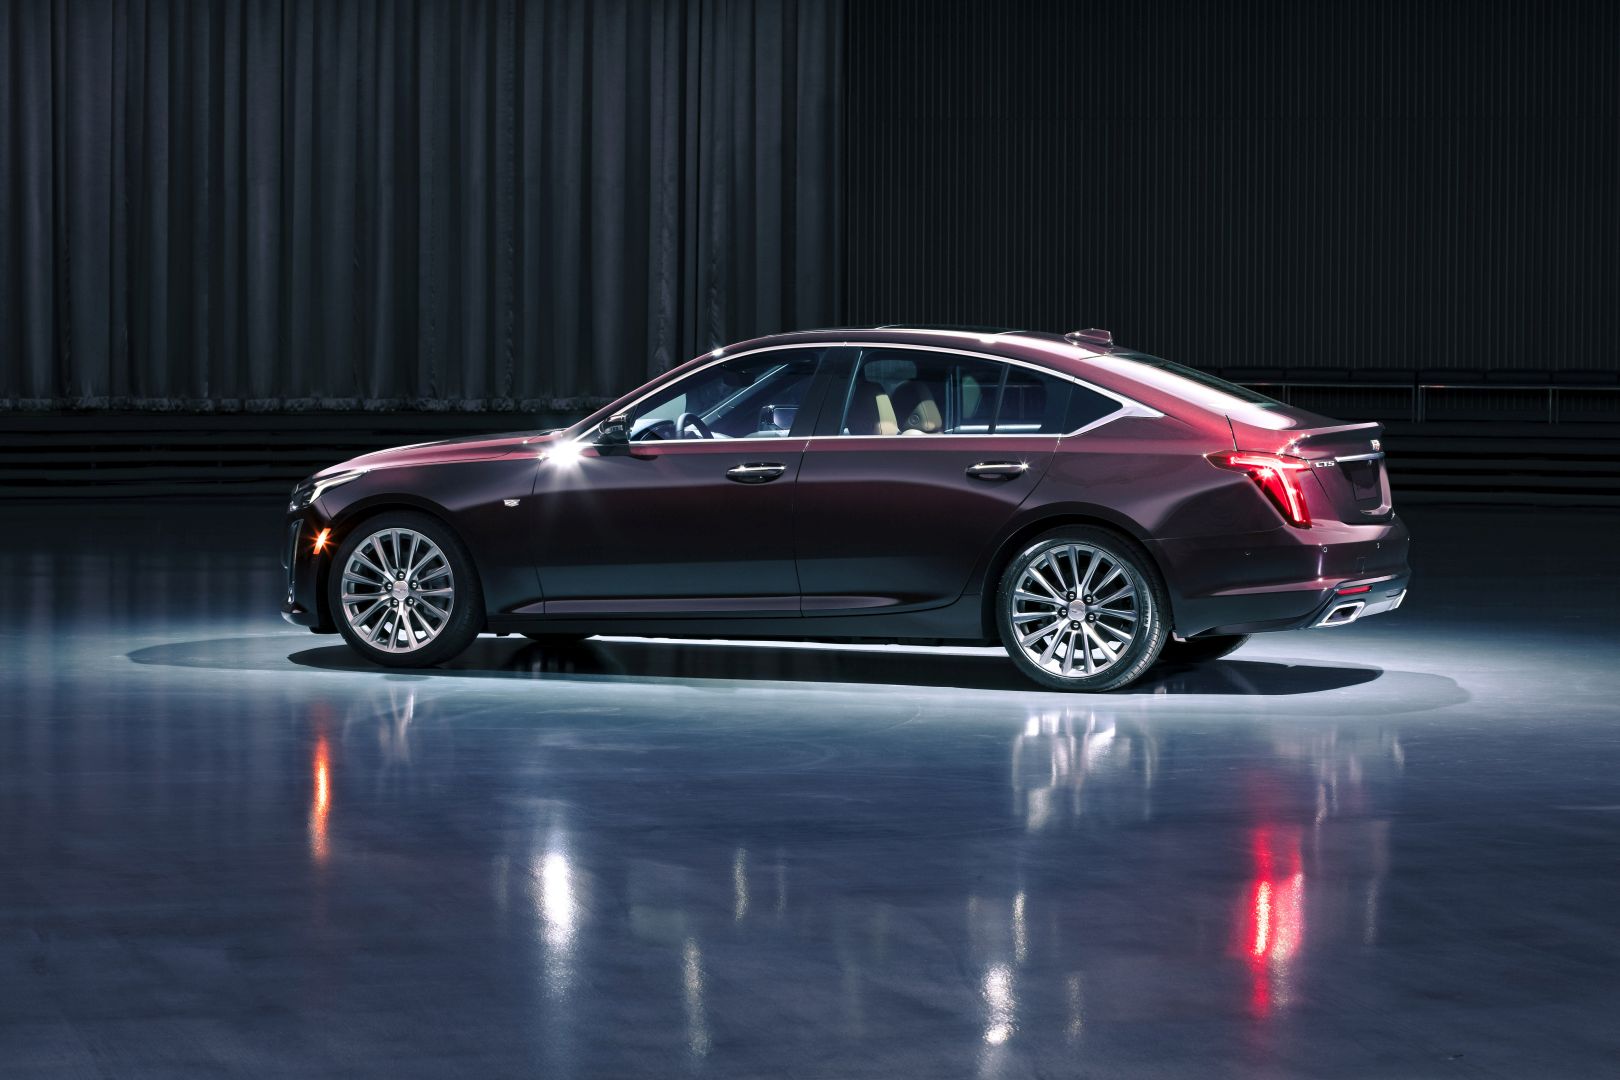 https://s1.cdn.autoevolution.com/images/news/gallery/over-34000-cadillac-ct4-and-ct5s-to-be-recalled-for-airbags_44.jpg